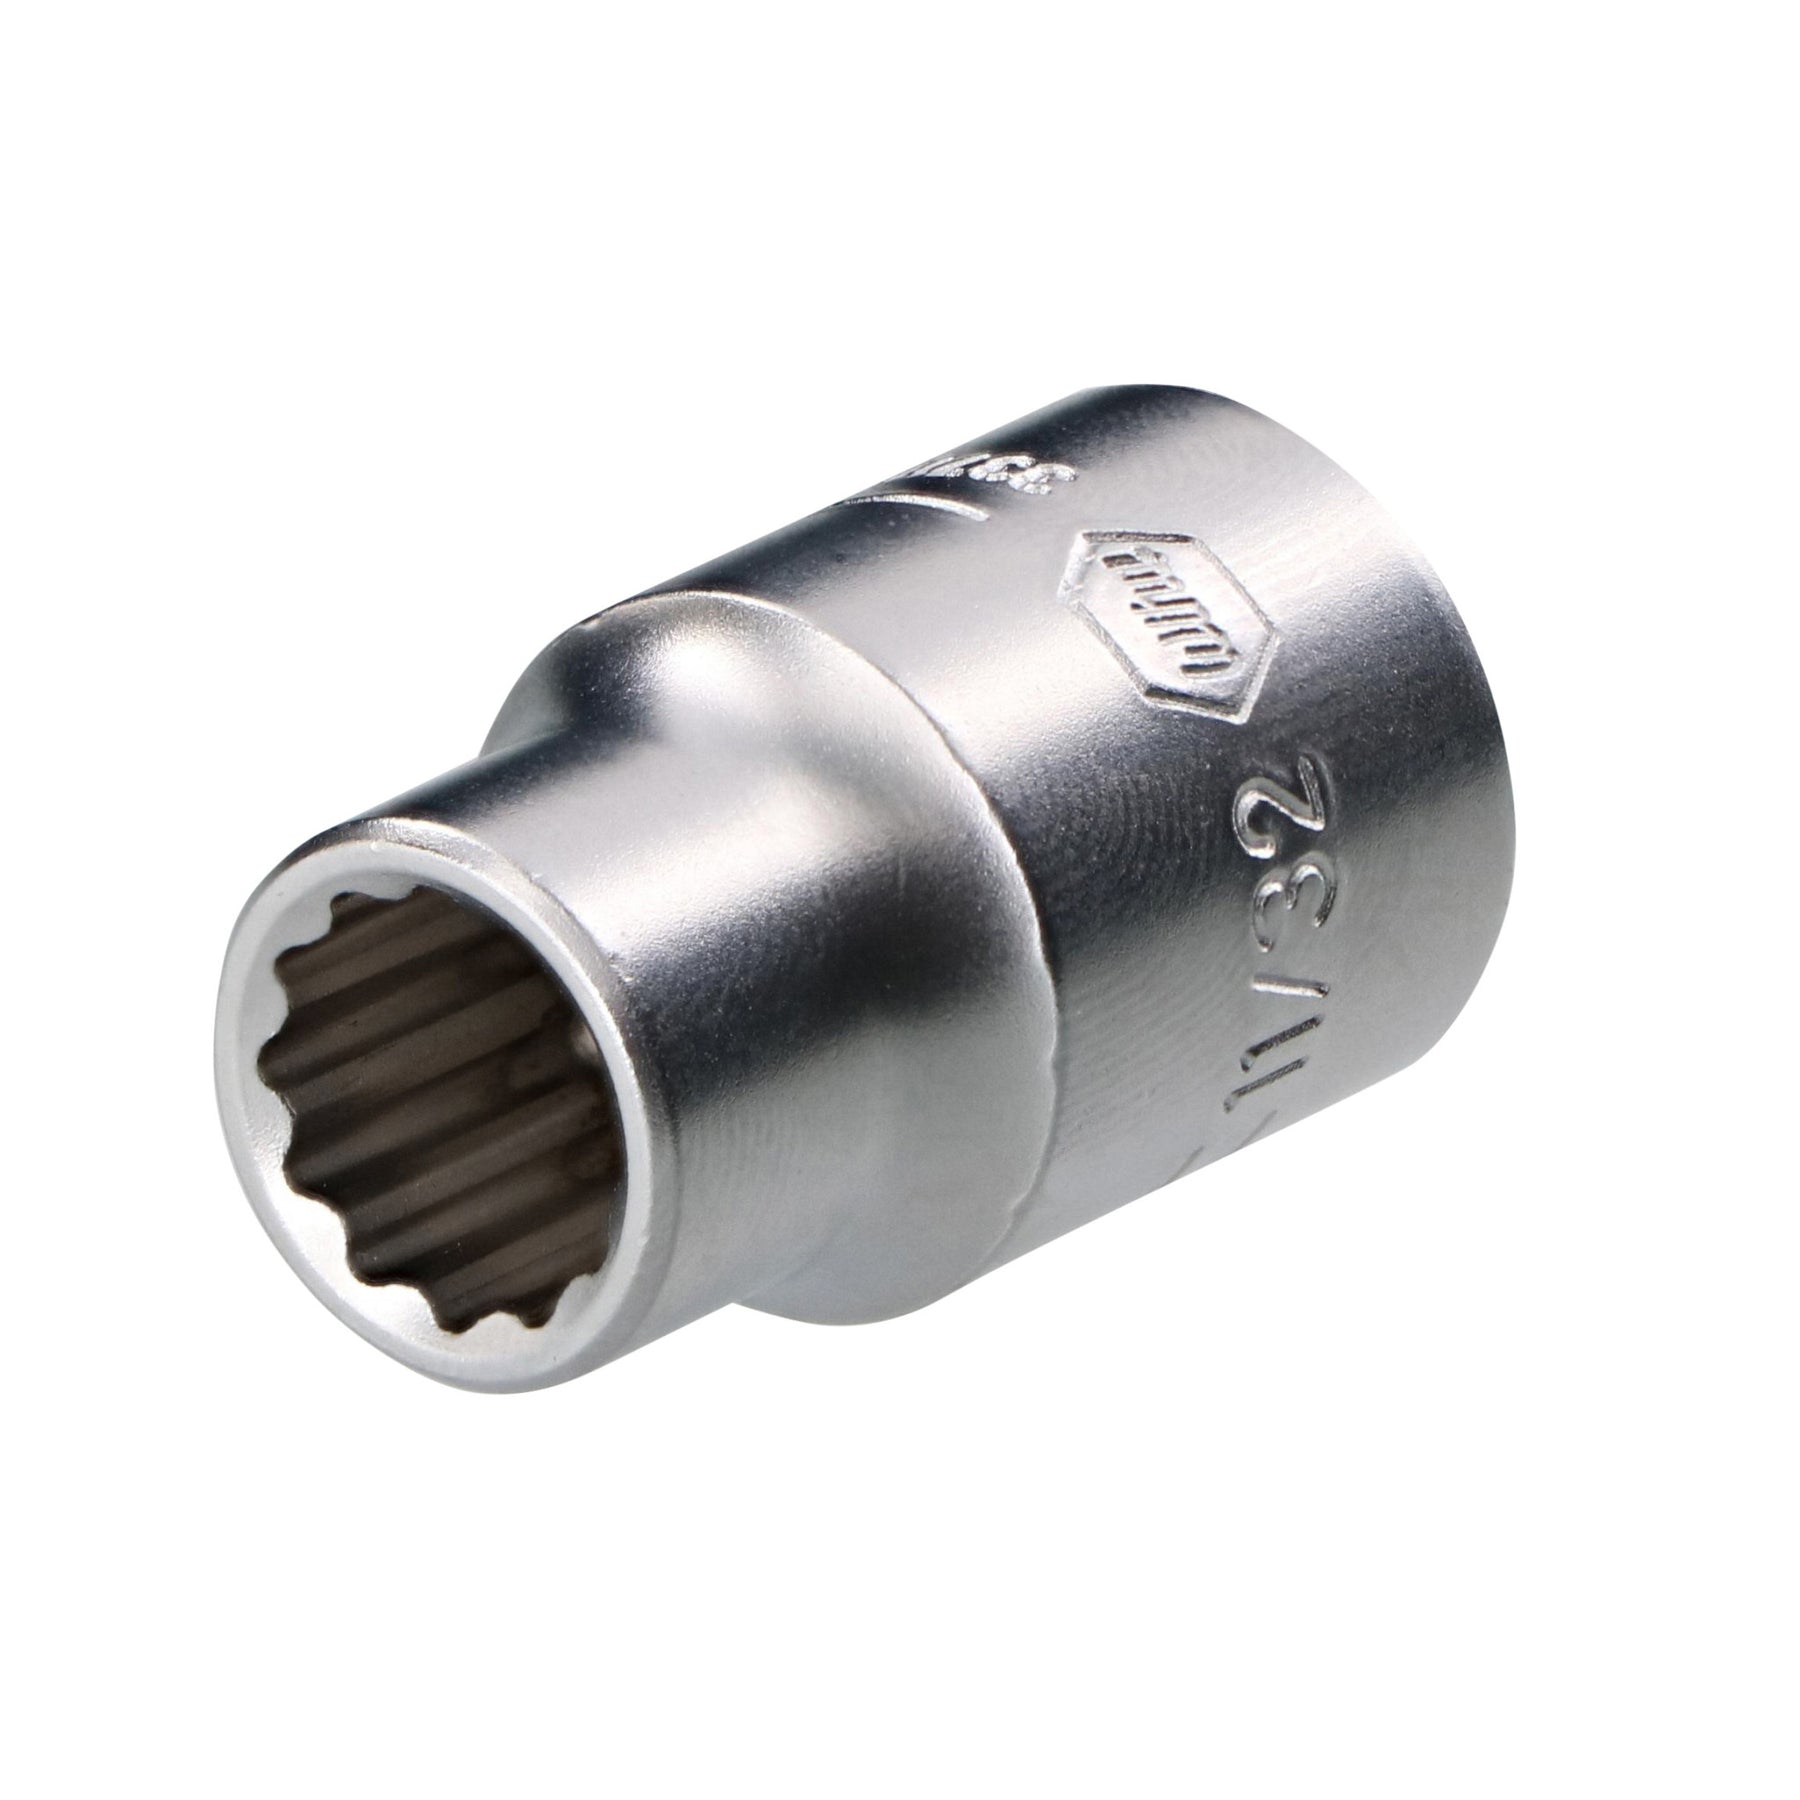 12 Point - 3/8 Inch Drive Socket - 11/32"